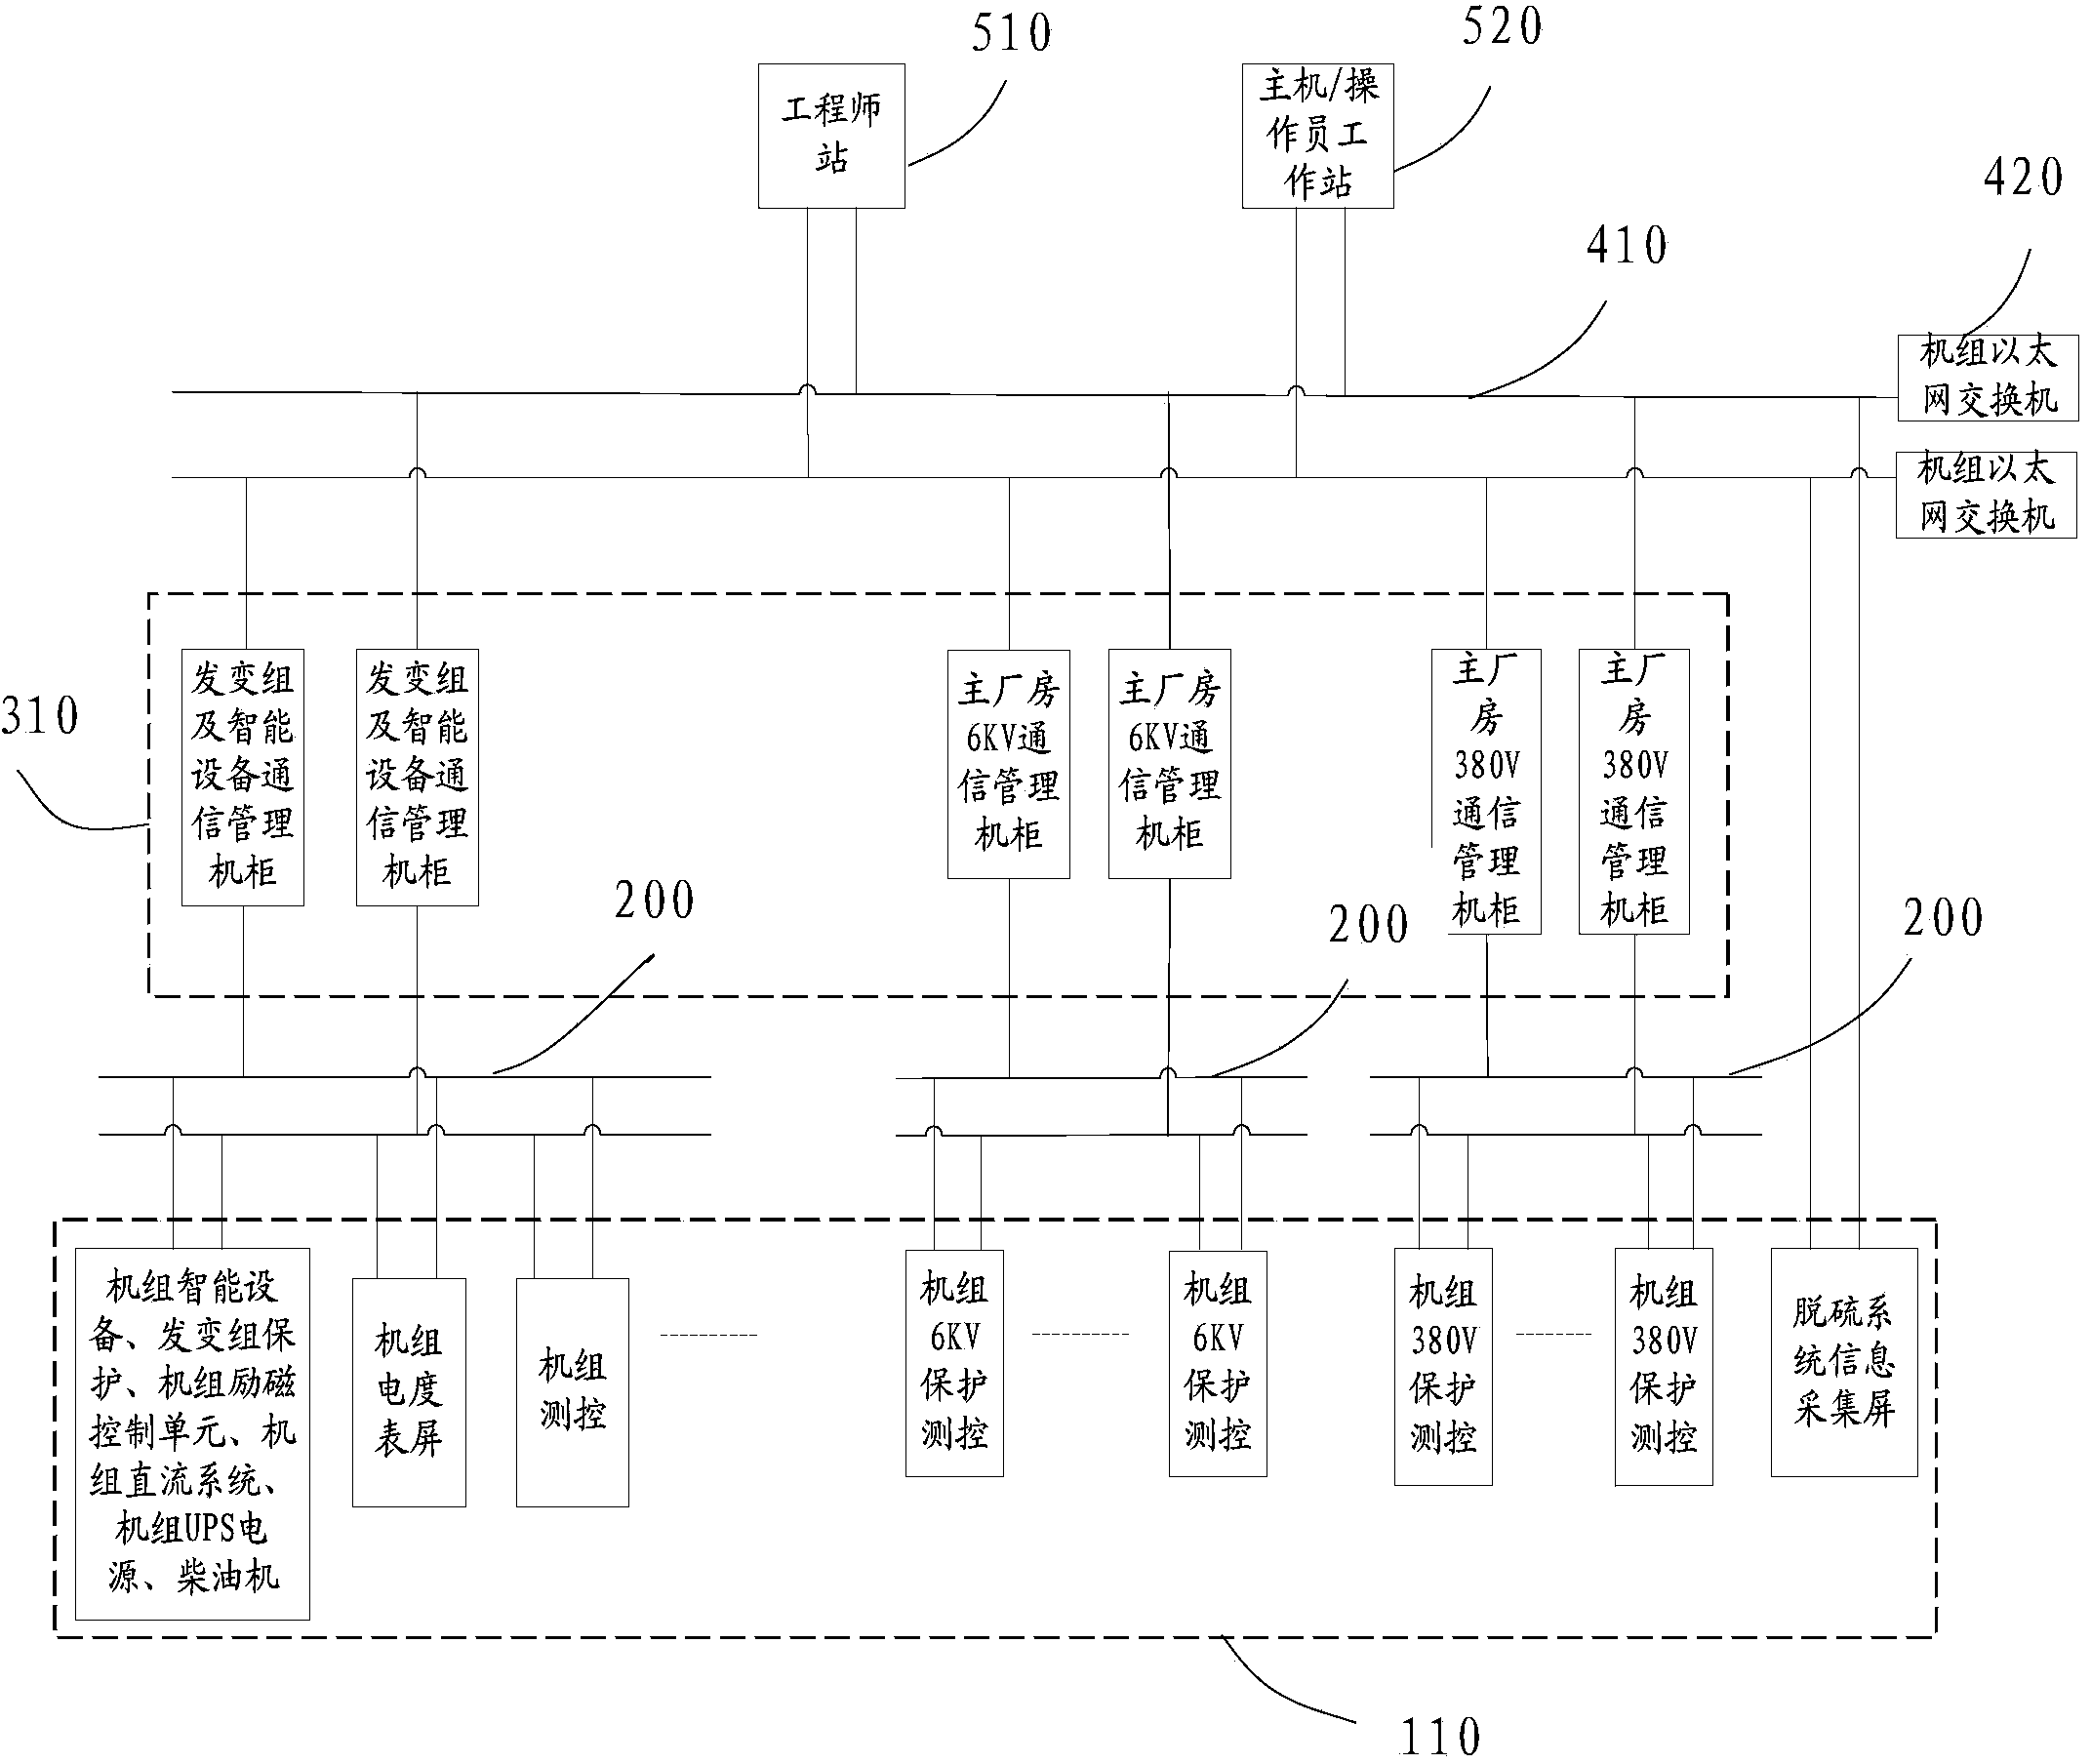 Integrated automation system of power station